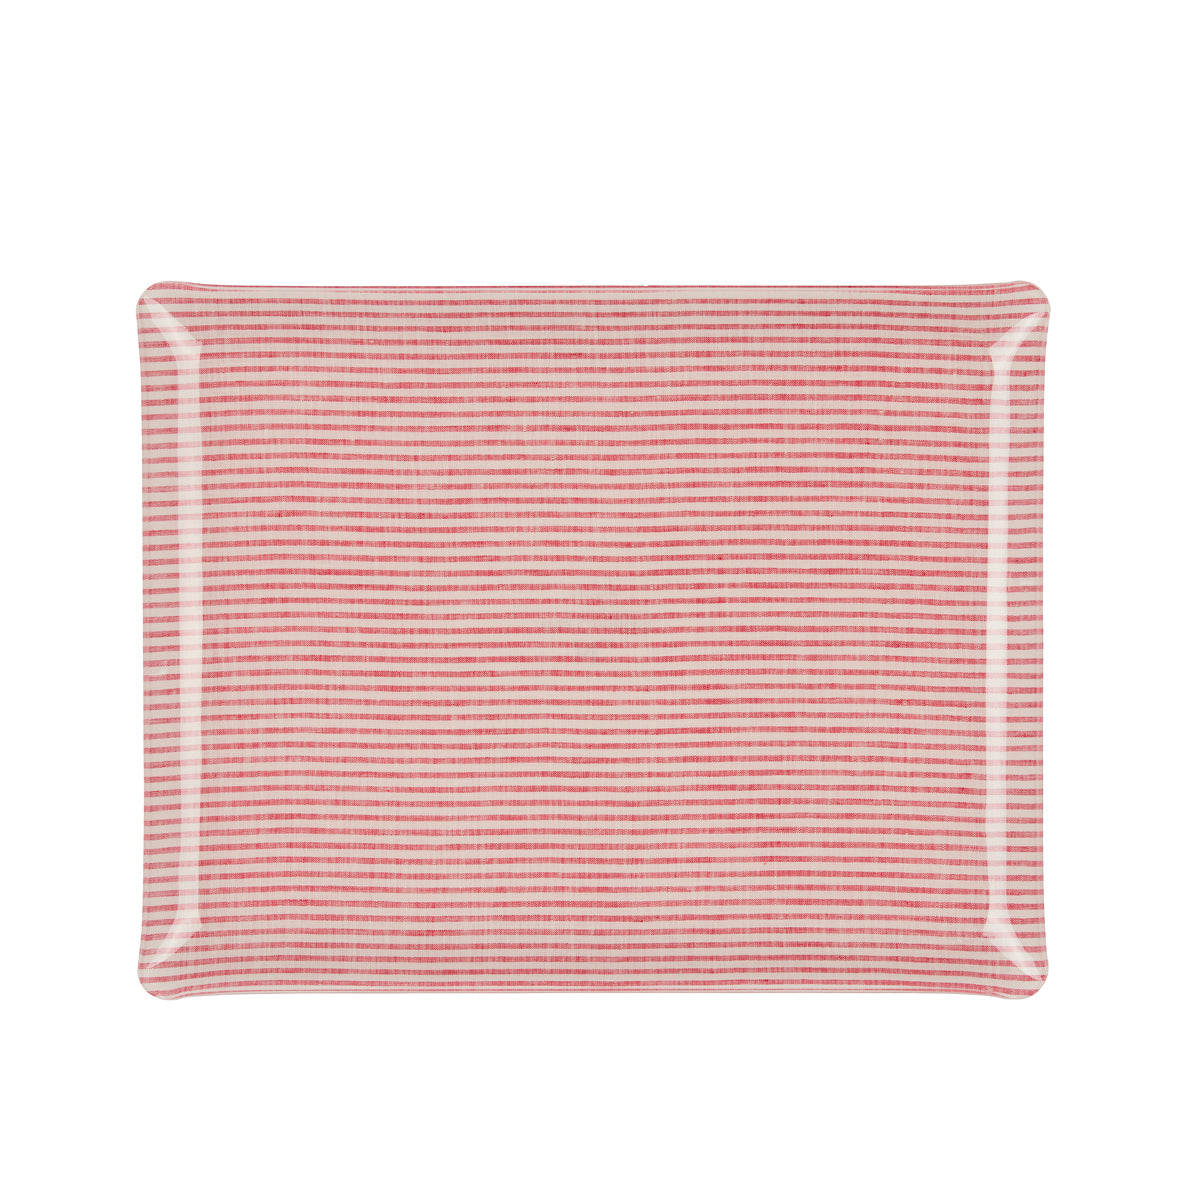 Nina Campbell Fabric Tray Large - Stripe Pink and White